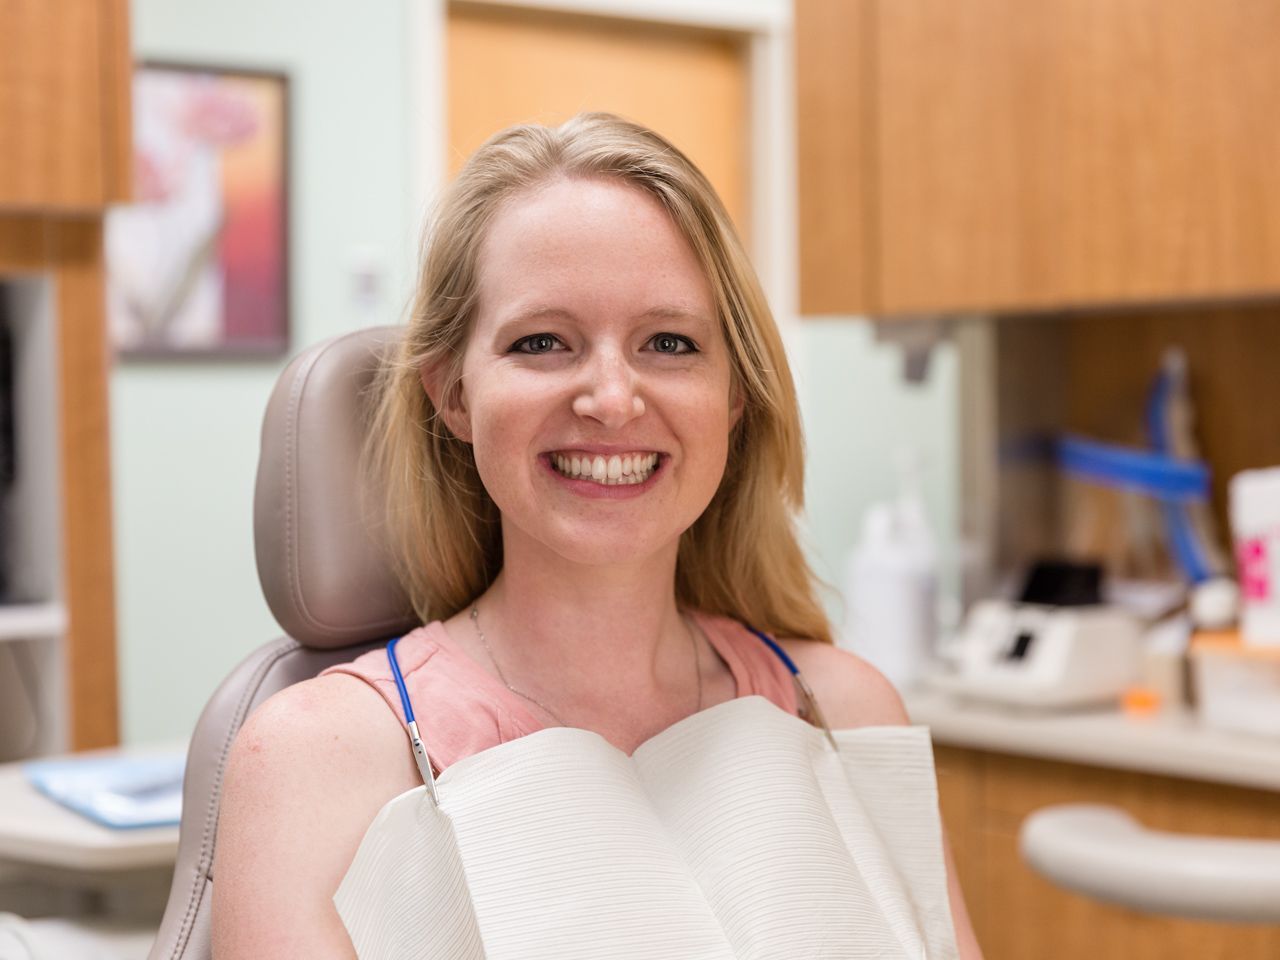 Head Shot Portrait of Smiling Beautiful Woman - Bellville, OH - Clearfork Family Dentistry